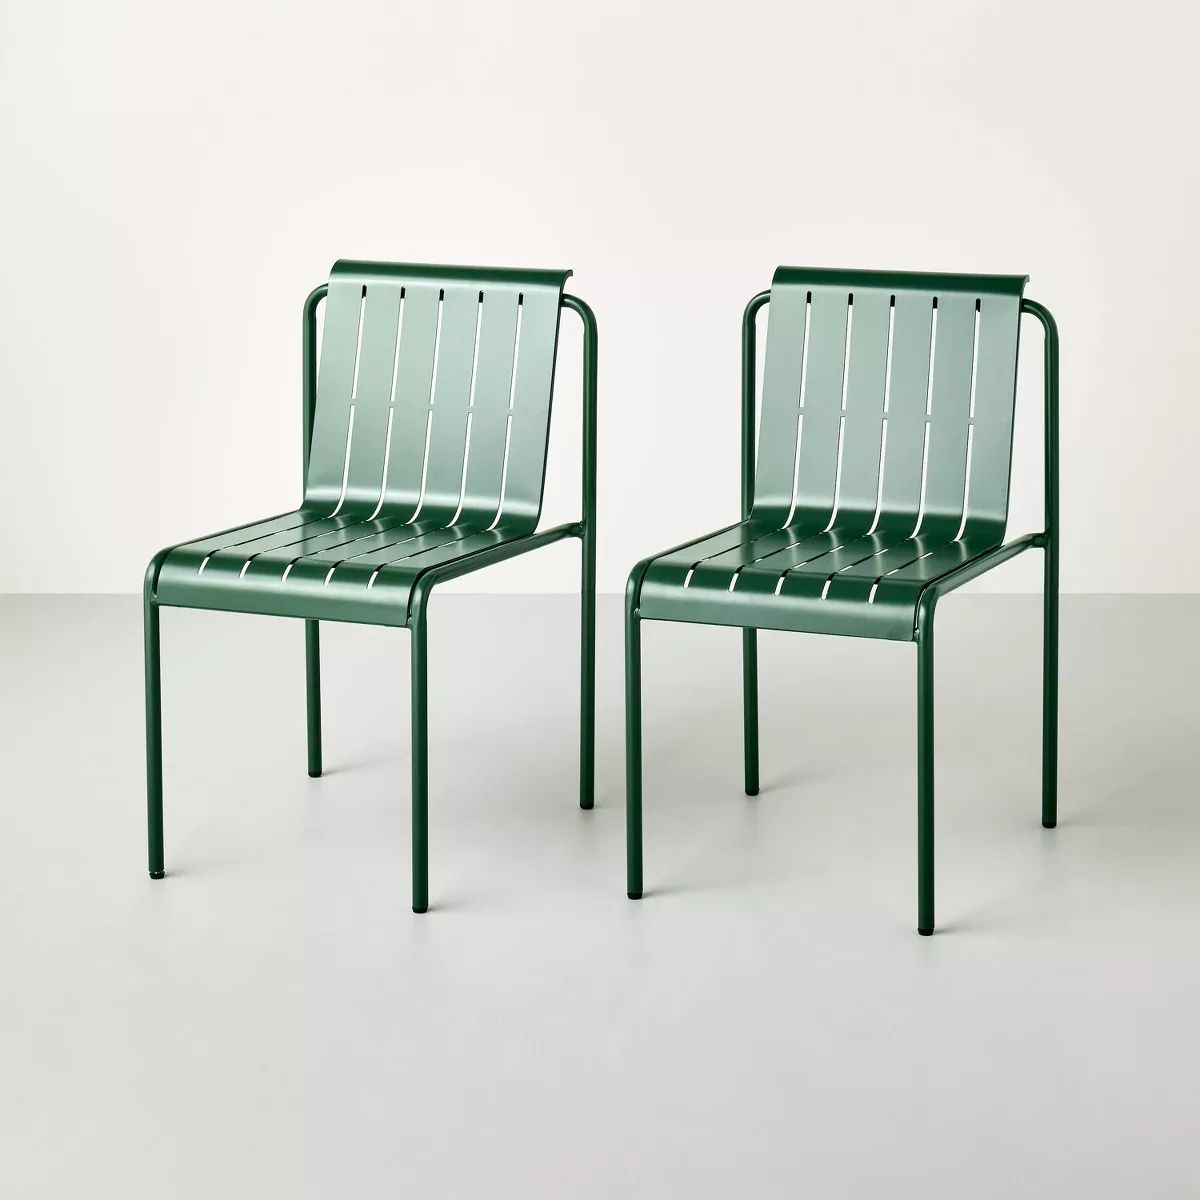 Slat Metal Outdoor Patio Dining Chairs (Set of 2) Green - Hearth & Hand™ with Magnolia | Target